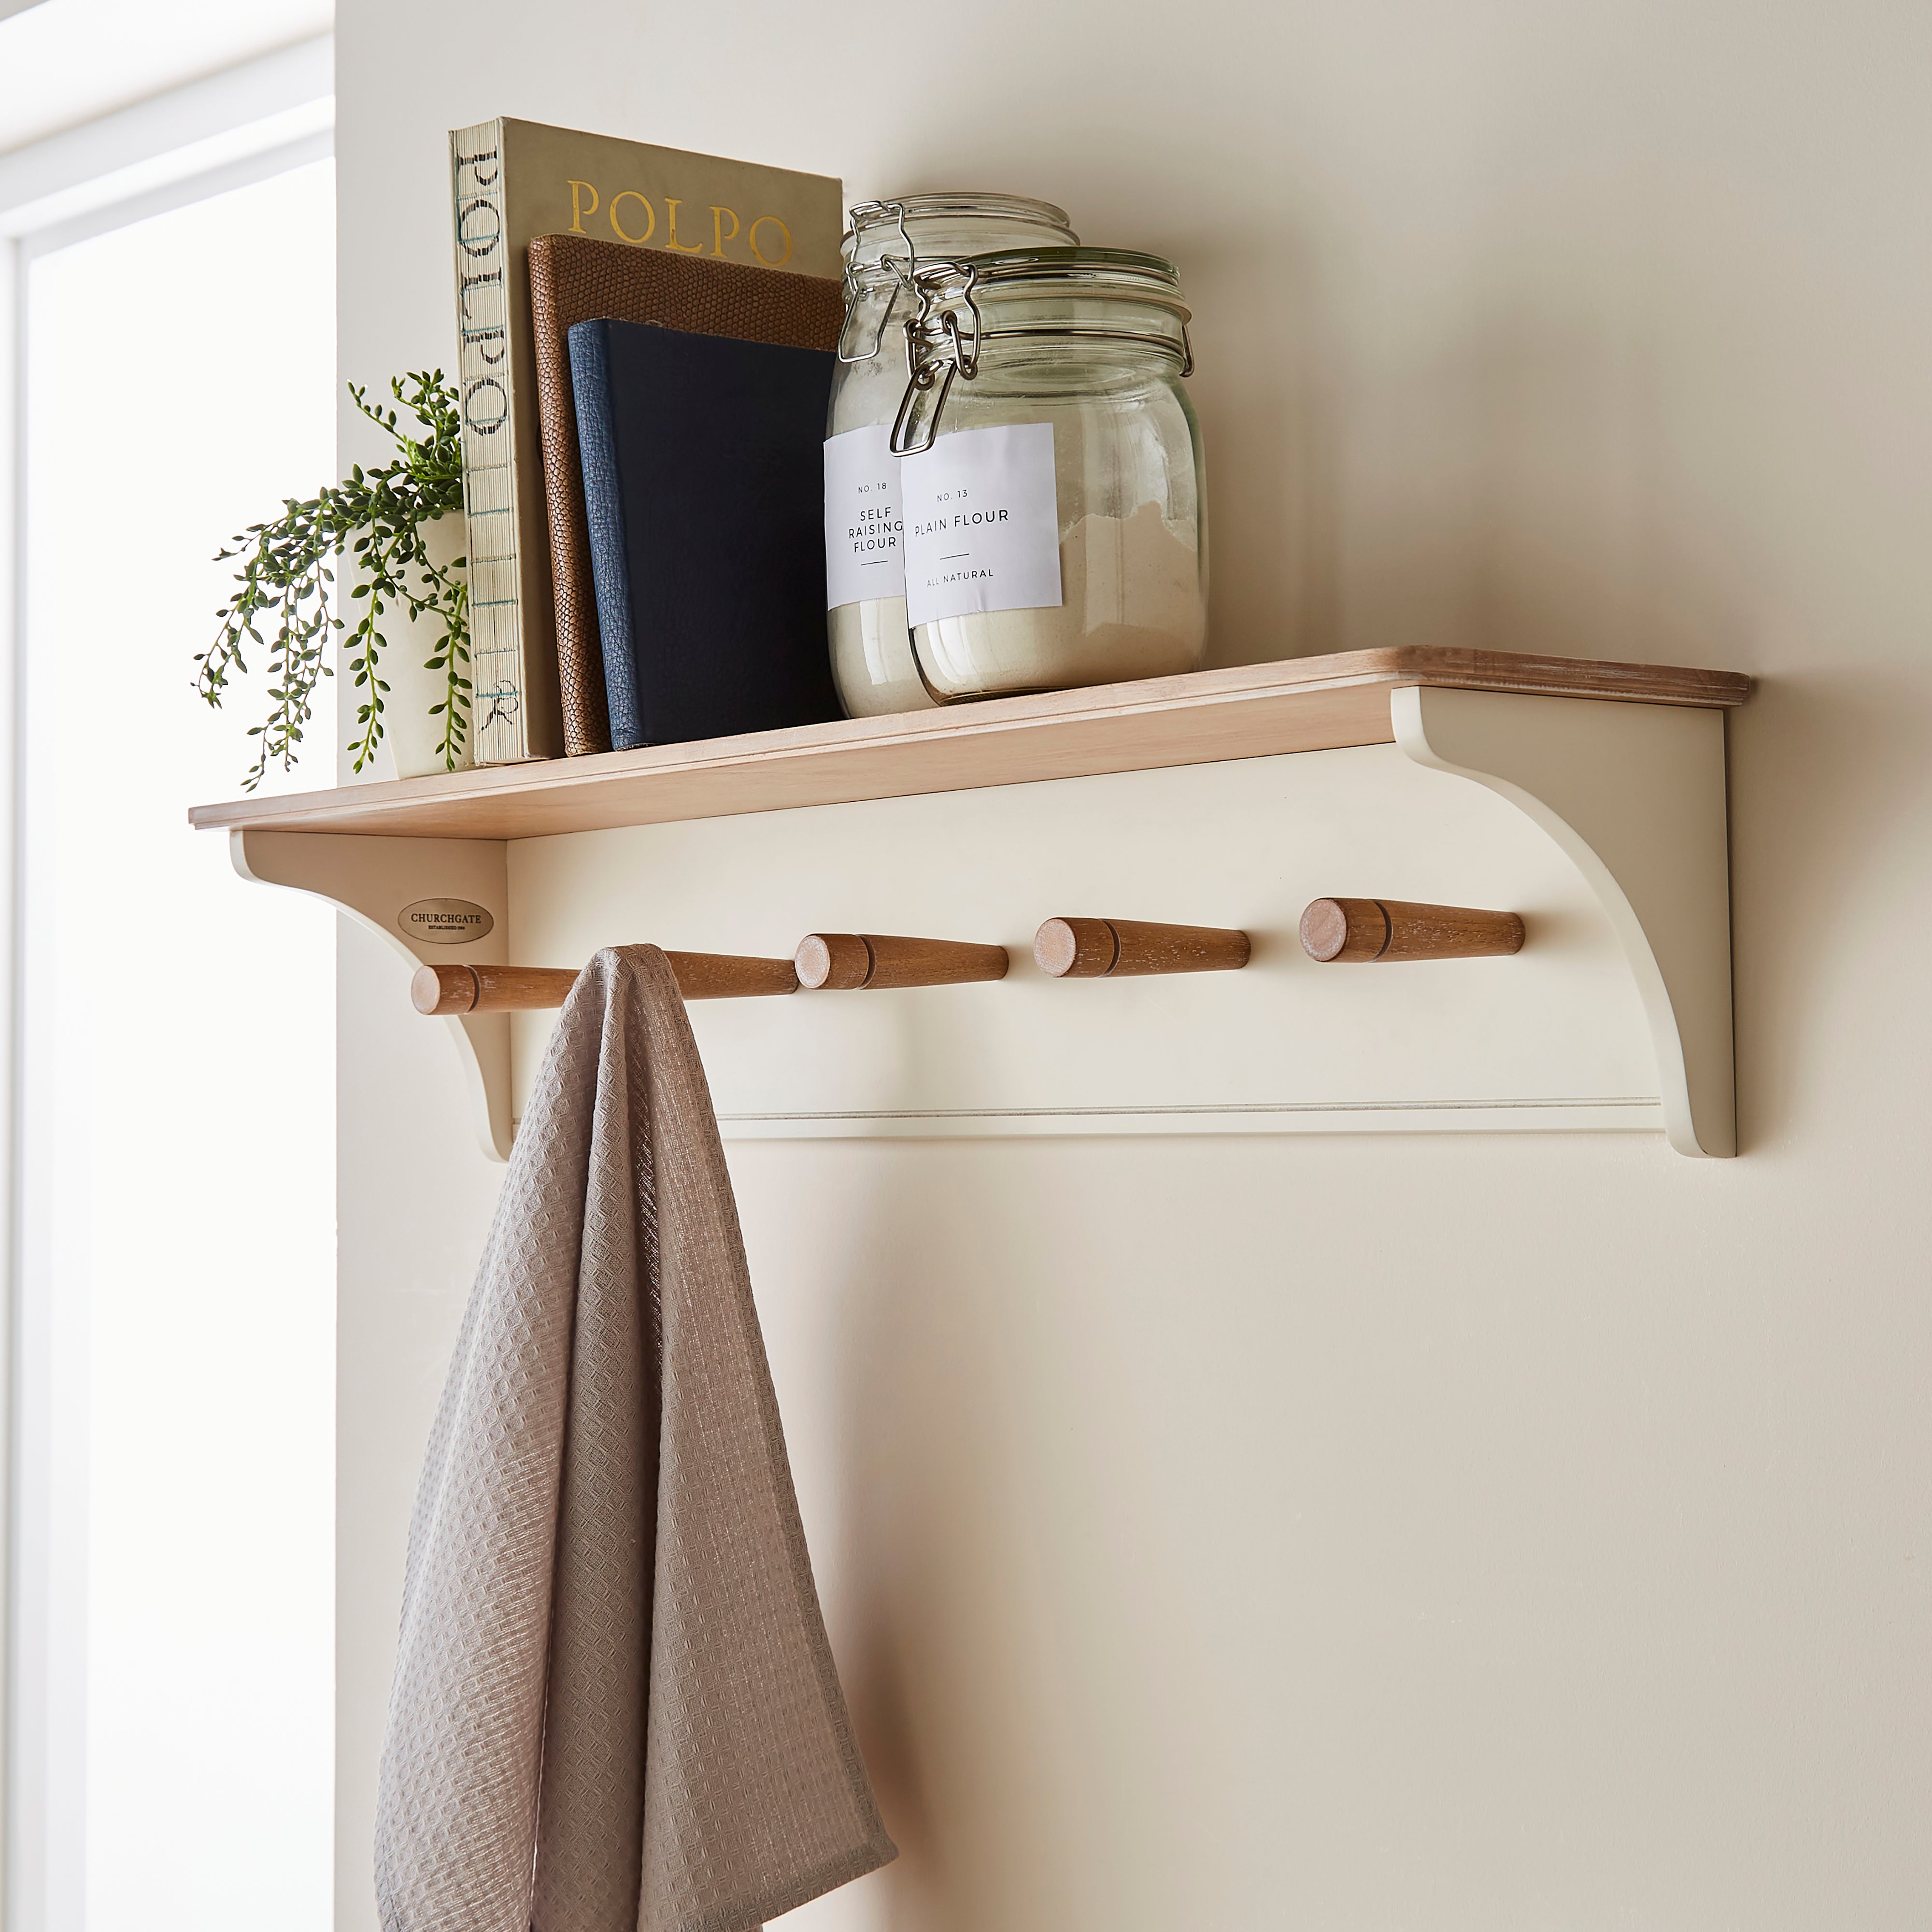 Hooked: DIY Wall Shelf With Hooks : 9 Steps (with Pictures